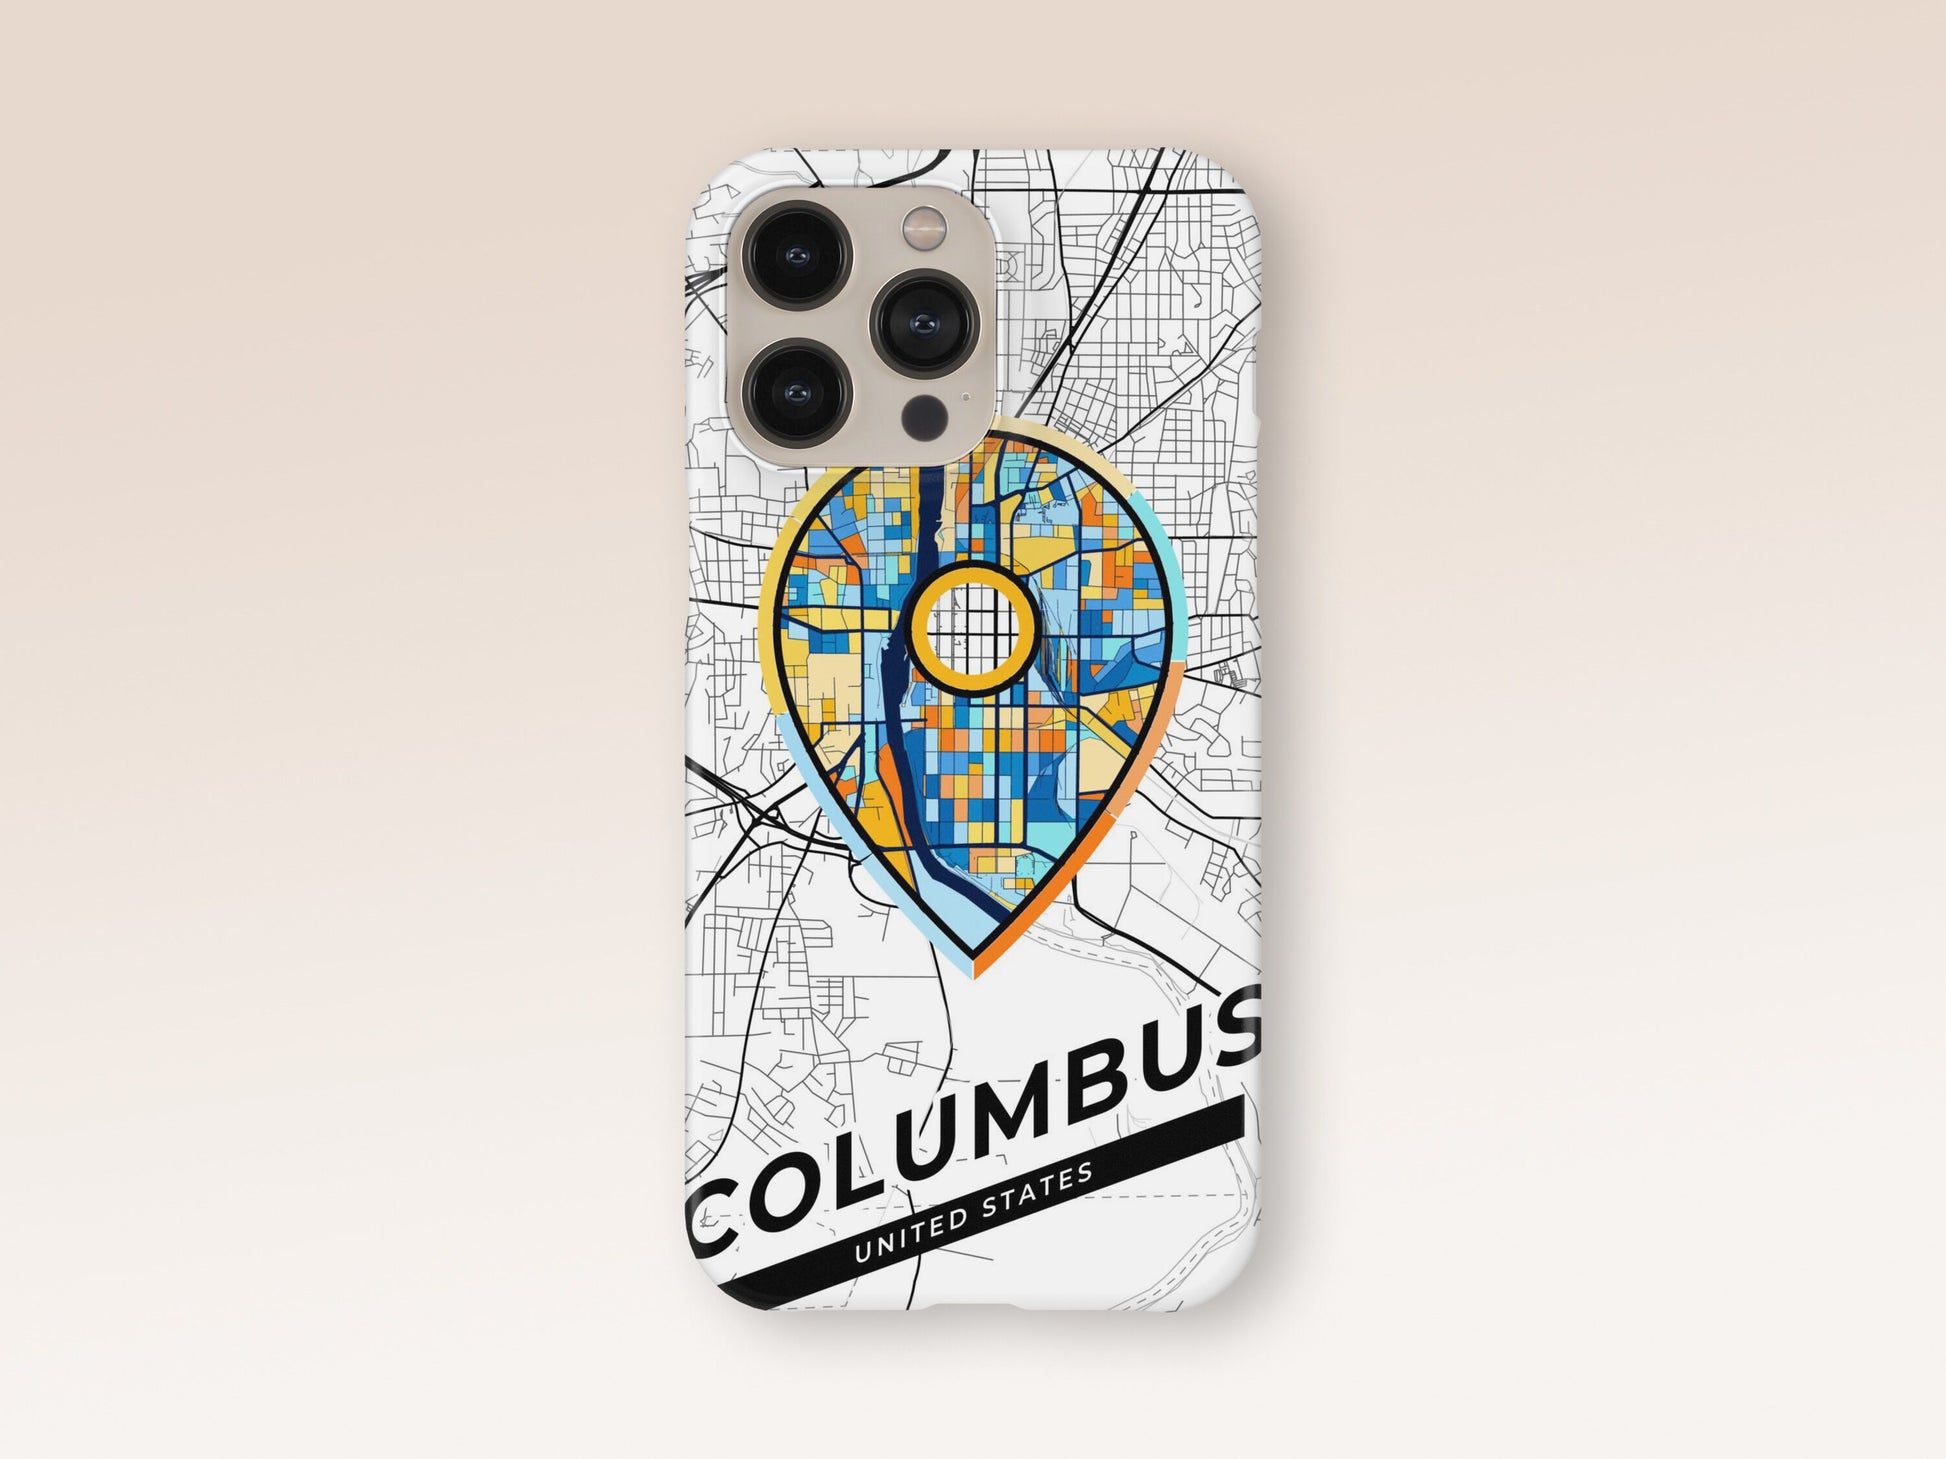 Columbus Georgia slim phone case with colorful icon. Birthday, wedding or housewarming gift. Couple match cases. 1